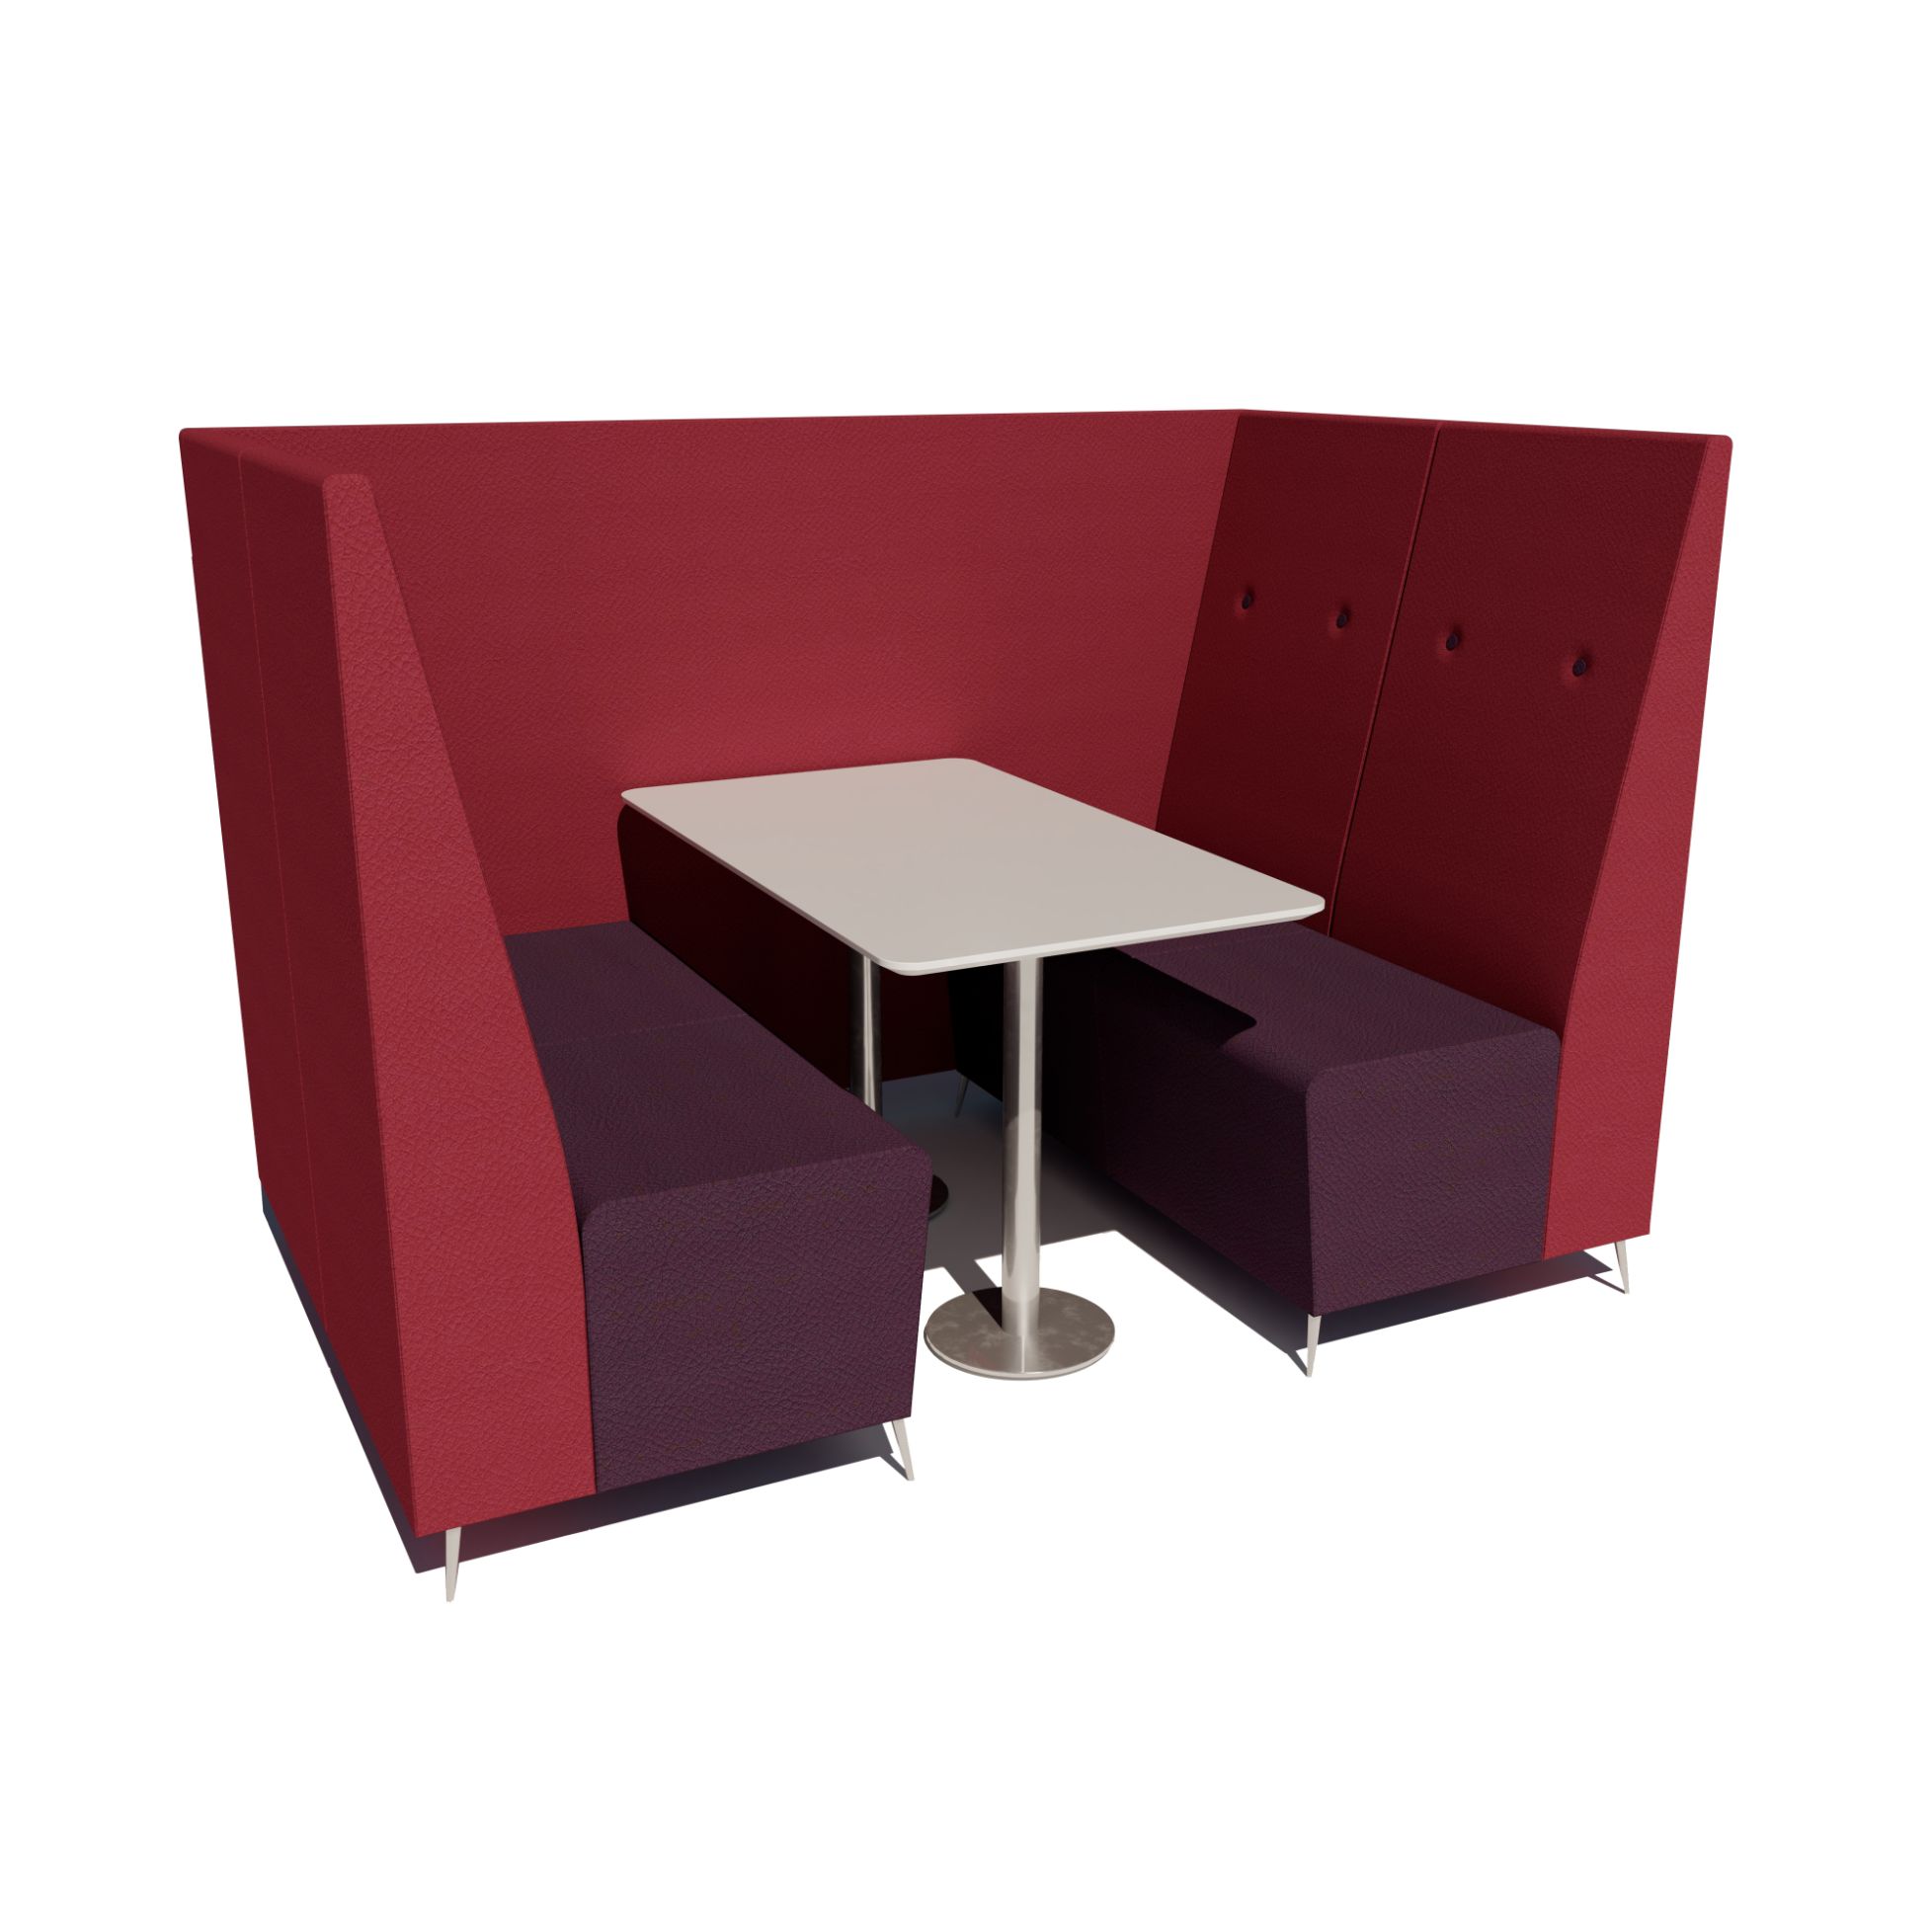 four person banquette seating unit with a link panel and an EDT 4, MFC finish table and a stainless steel column leg